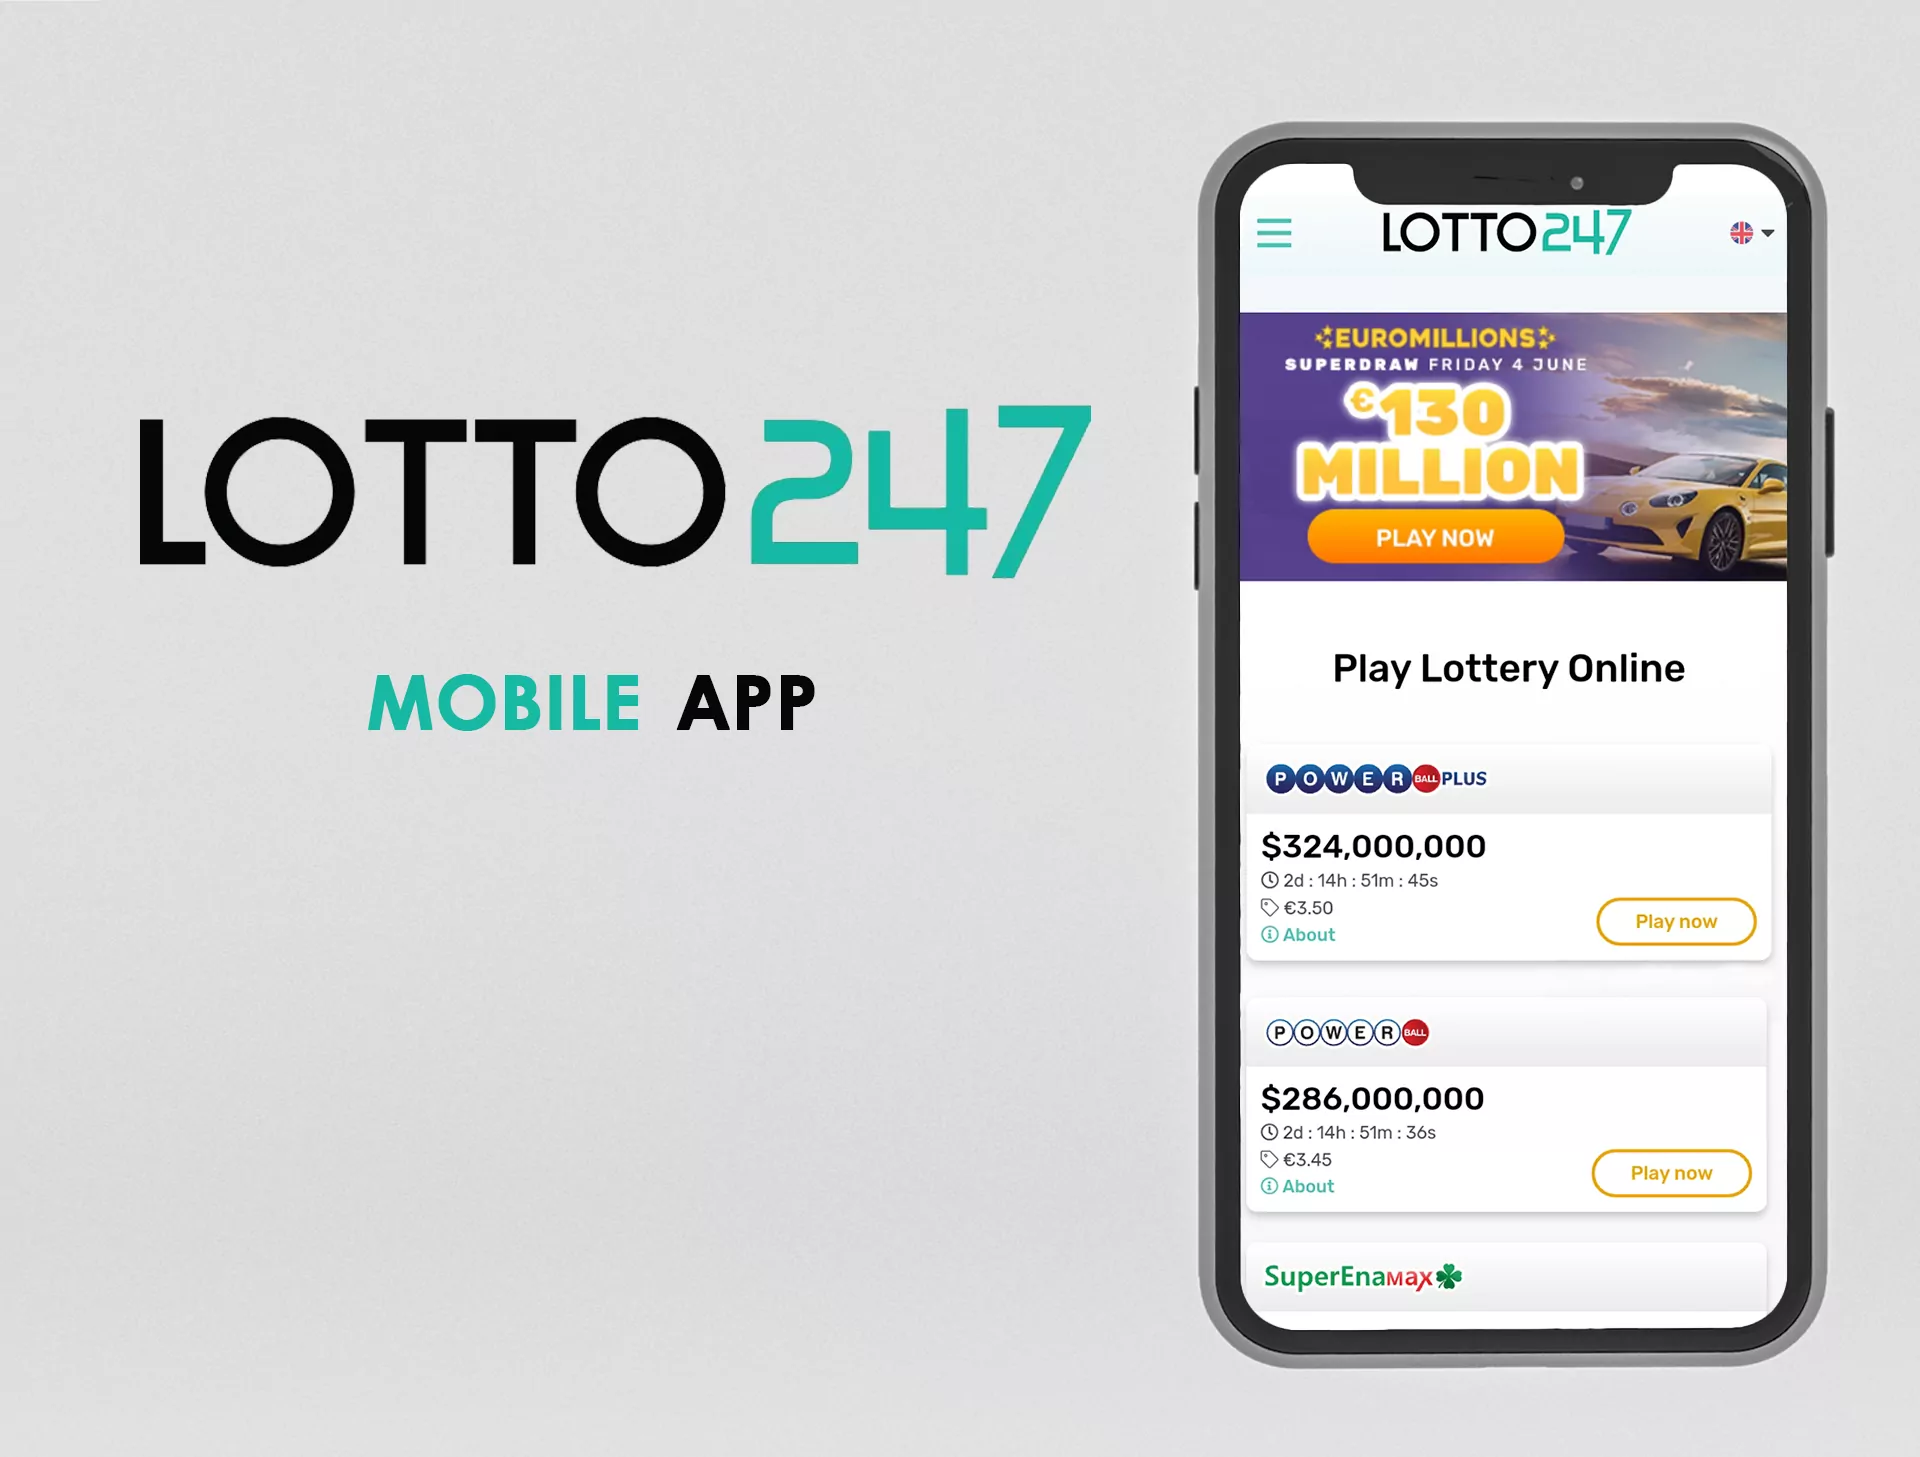 If you are going to play lotteries regularly, you'd better install the Lotto247 app.